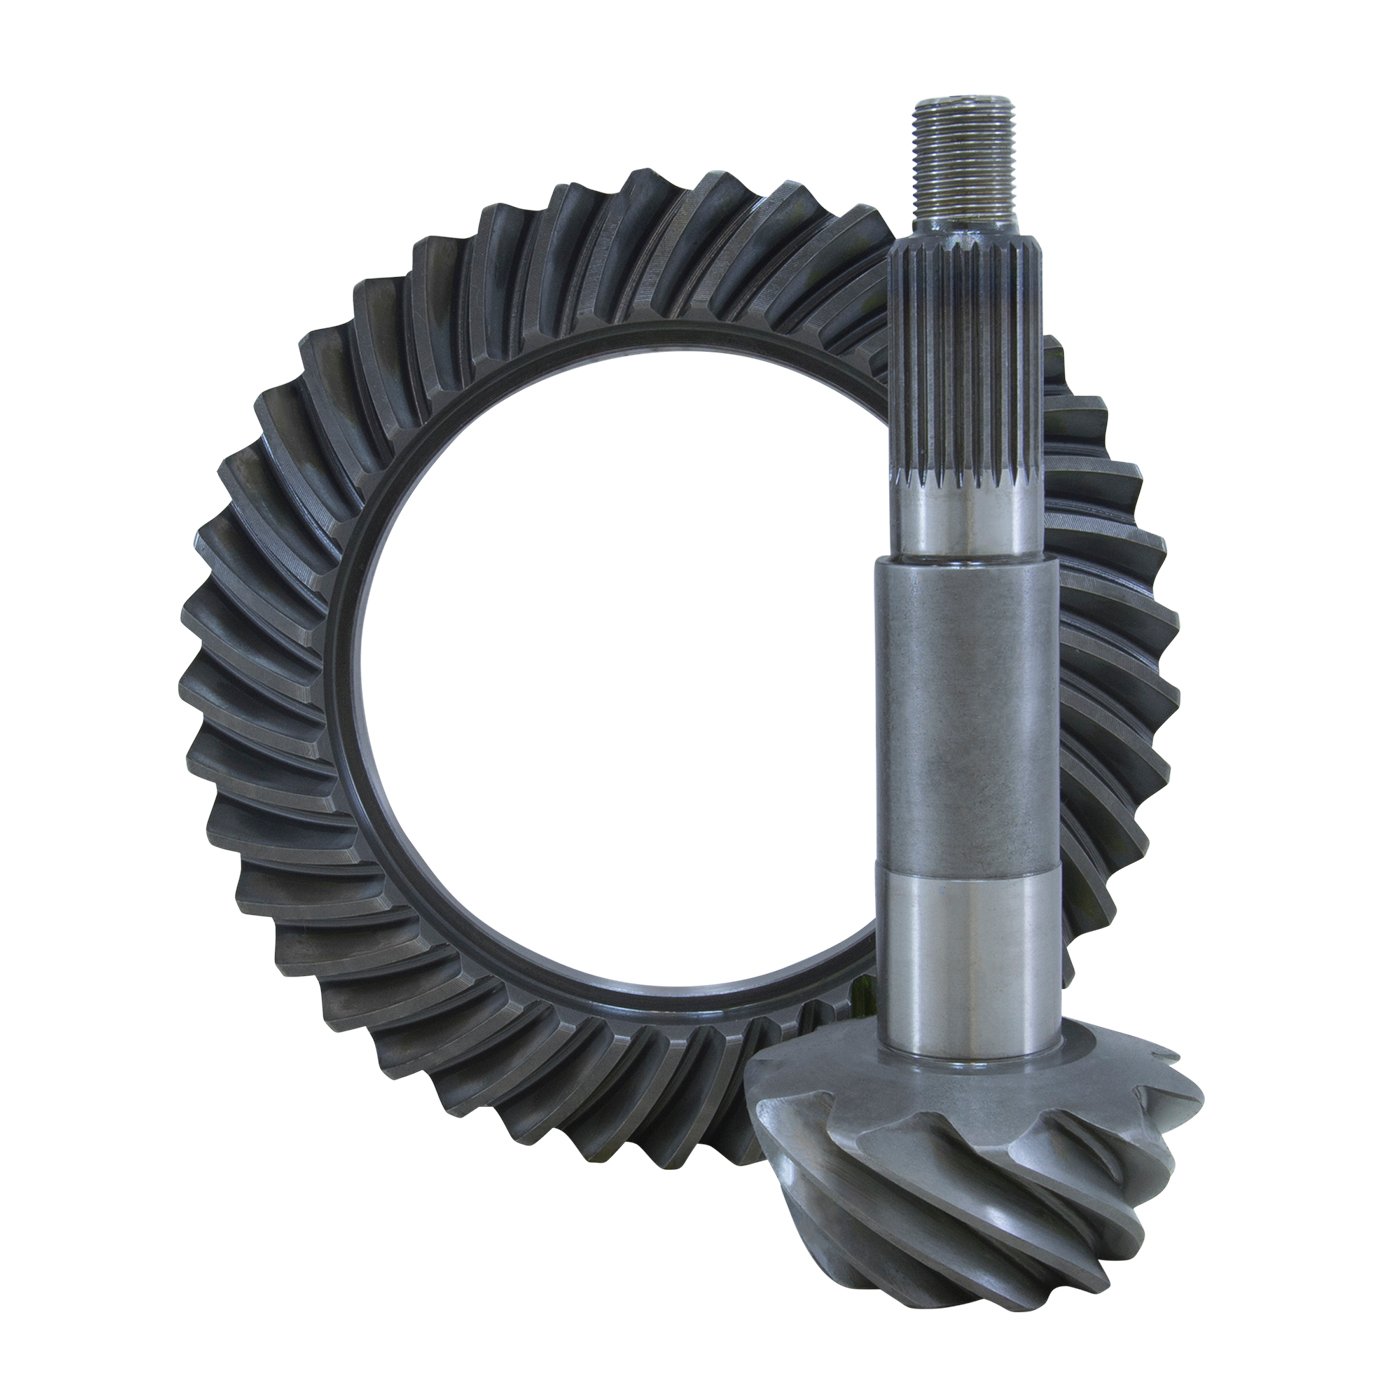 USA Standard ZG D44-513 Replacement Ring & Pinion Gear Set, For Dana 44, 5.13 Ratio